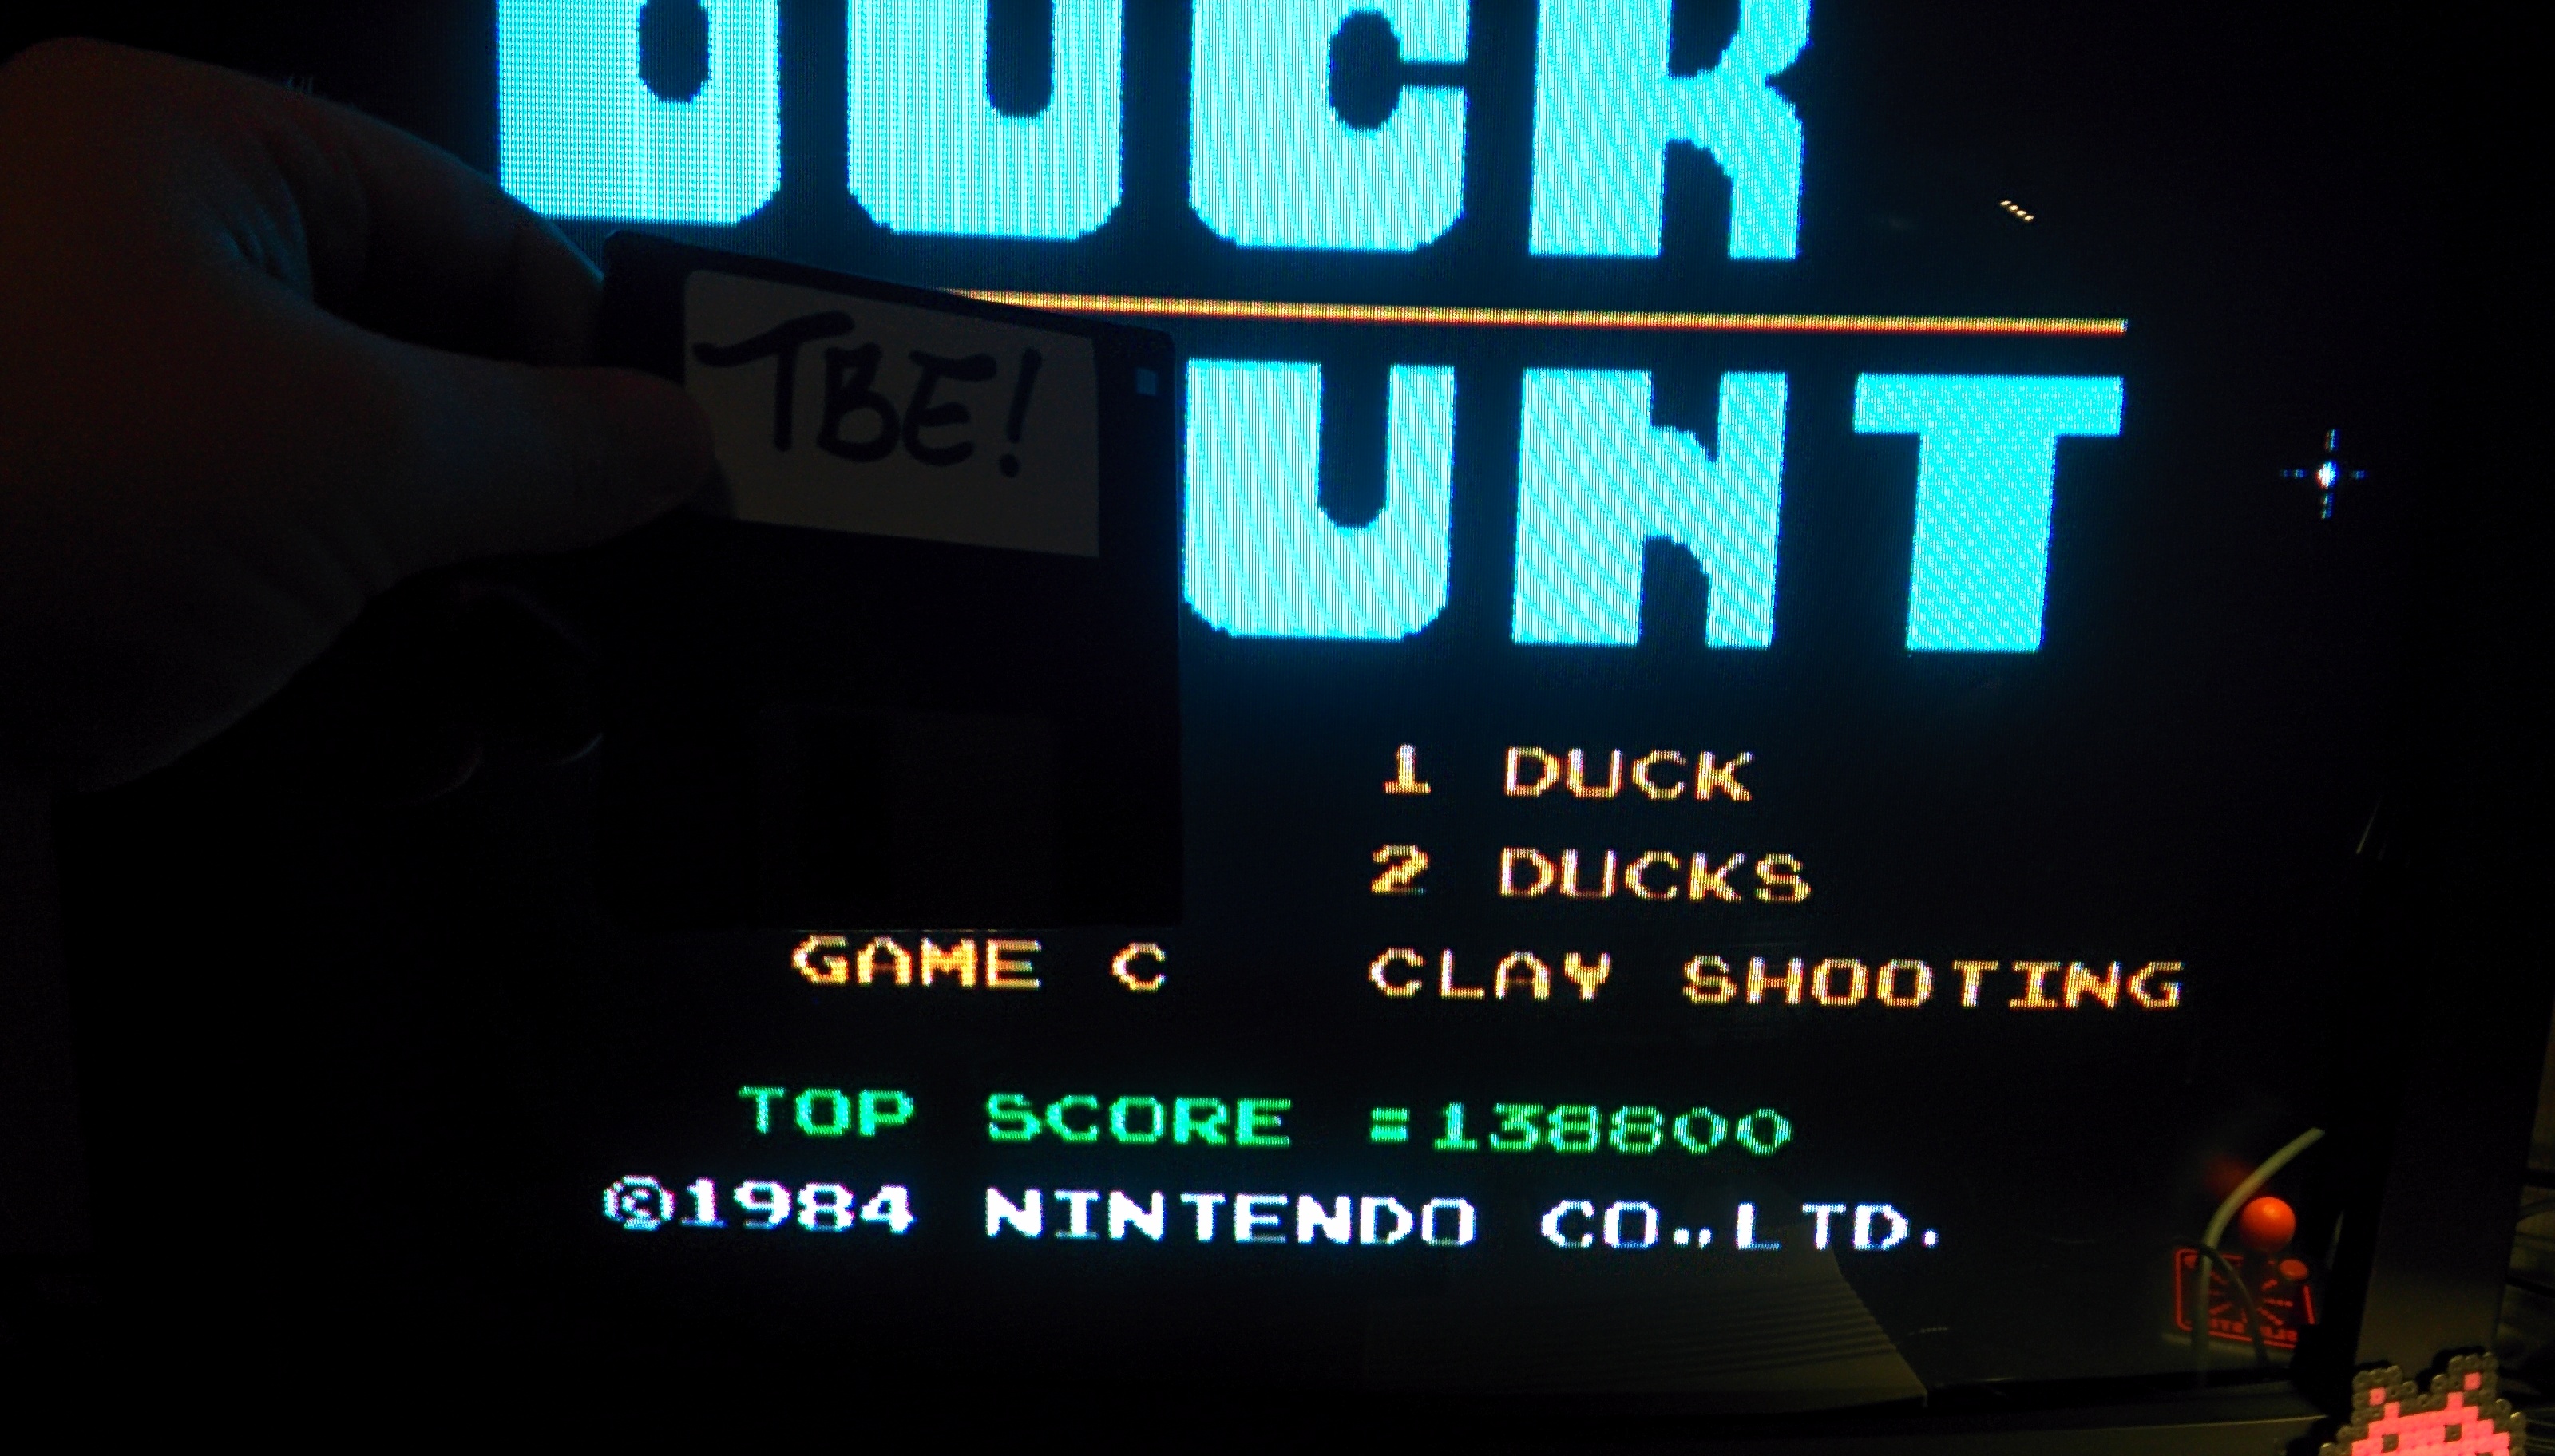 Sixx: Duck Hunt: Two Ducks [Any Distance] (NES/Famicom Emulated) 138,800 points on 2014-11-22 03:03:41